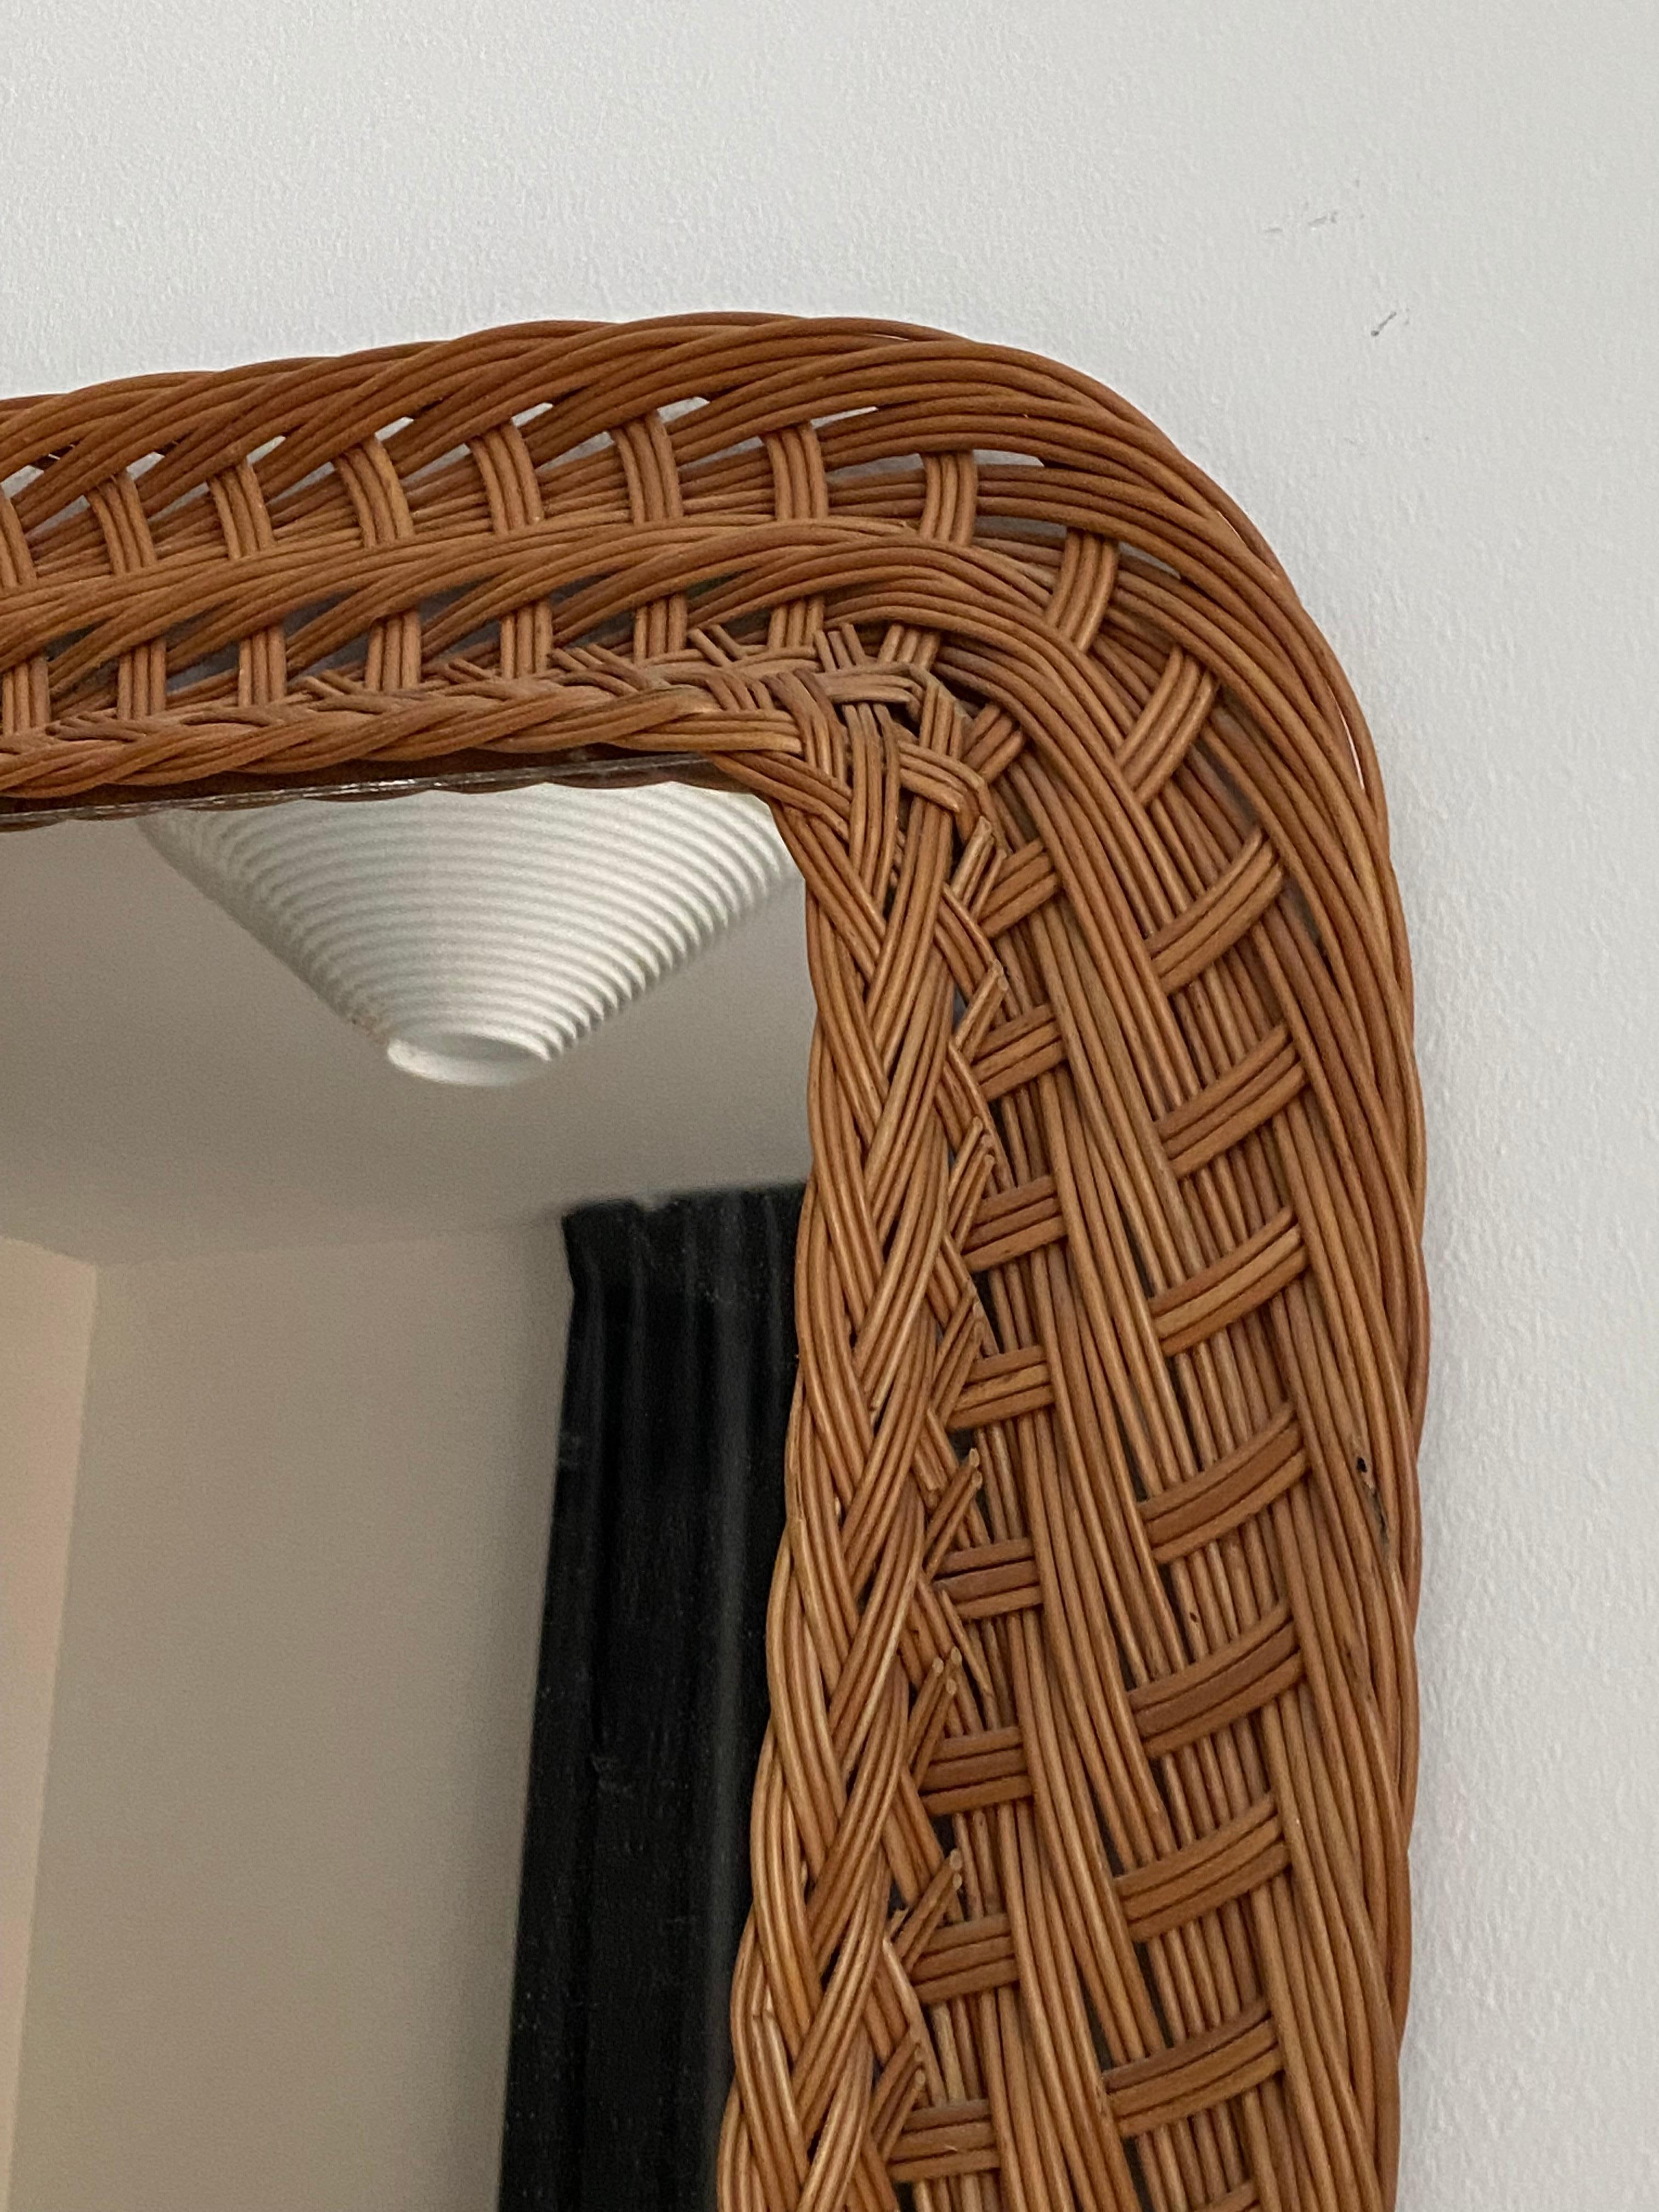 A wall mirror, produced in Italy, c. 1970s. Cut mirror glass is framed in rattan. Unmarked

Other designers of the period include Gio Ponti, Fontana Arte, Max Ingrand, Franco Albini, and Josef Frank.